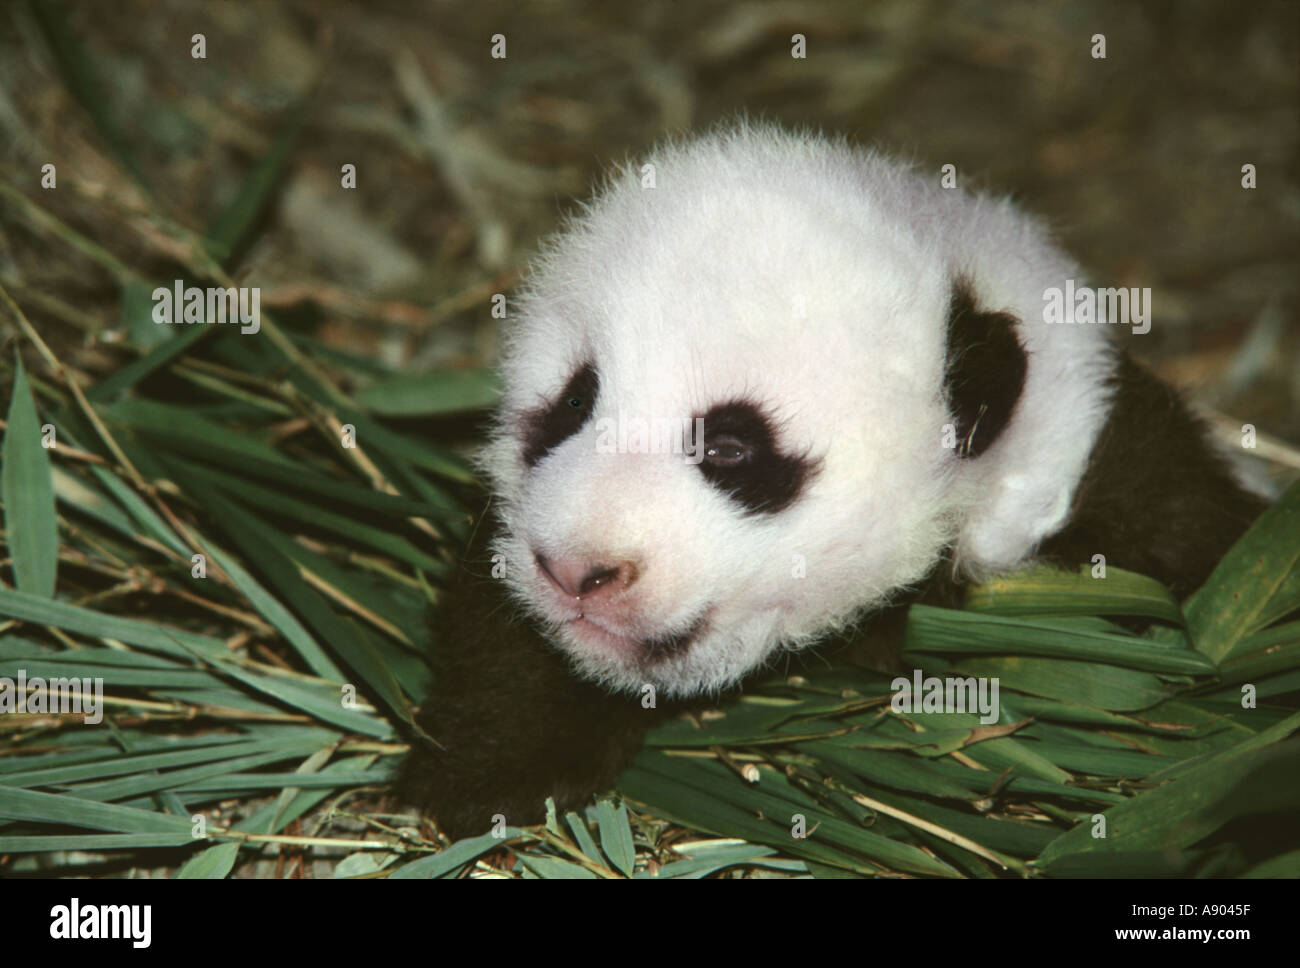 4 month old Giant Panda cub on the grass Wolong Panda Reserve Sichuan Province China Stock Photo